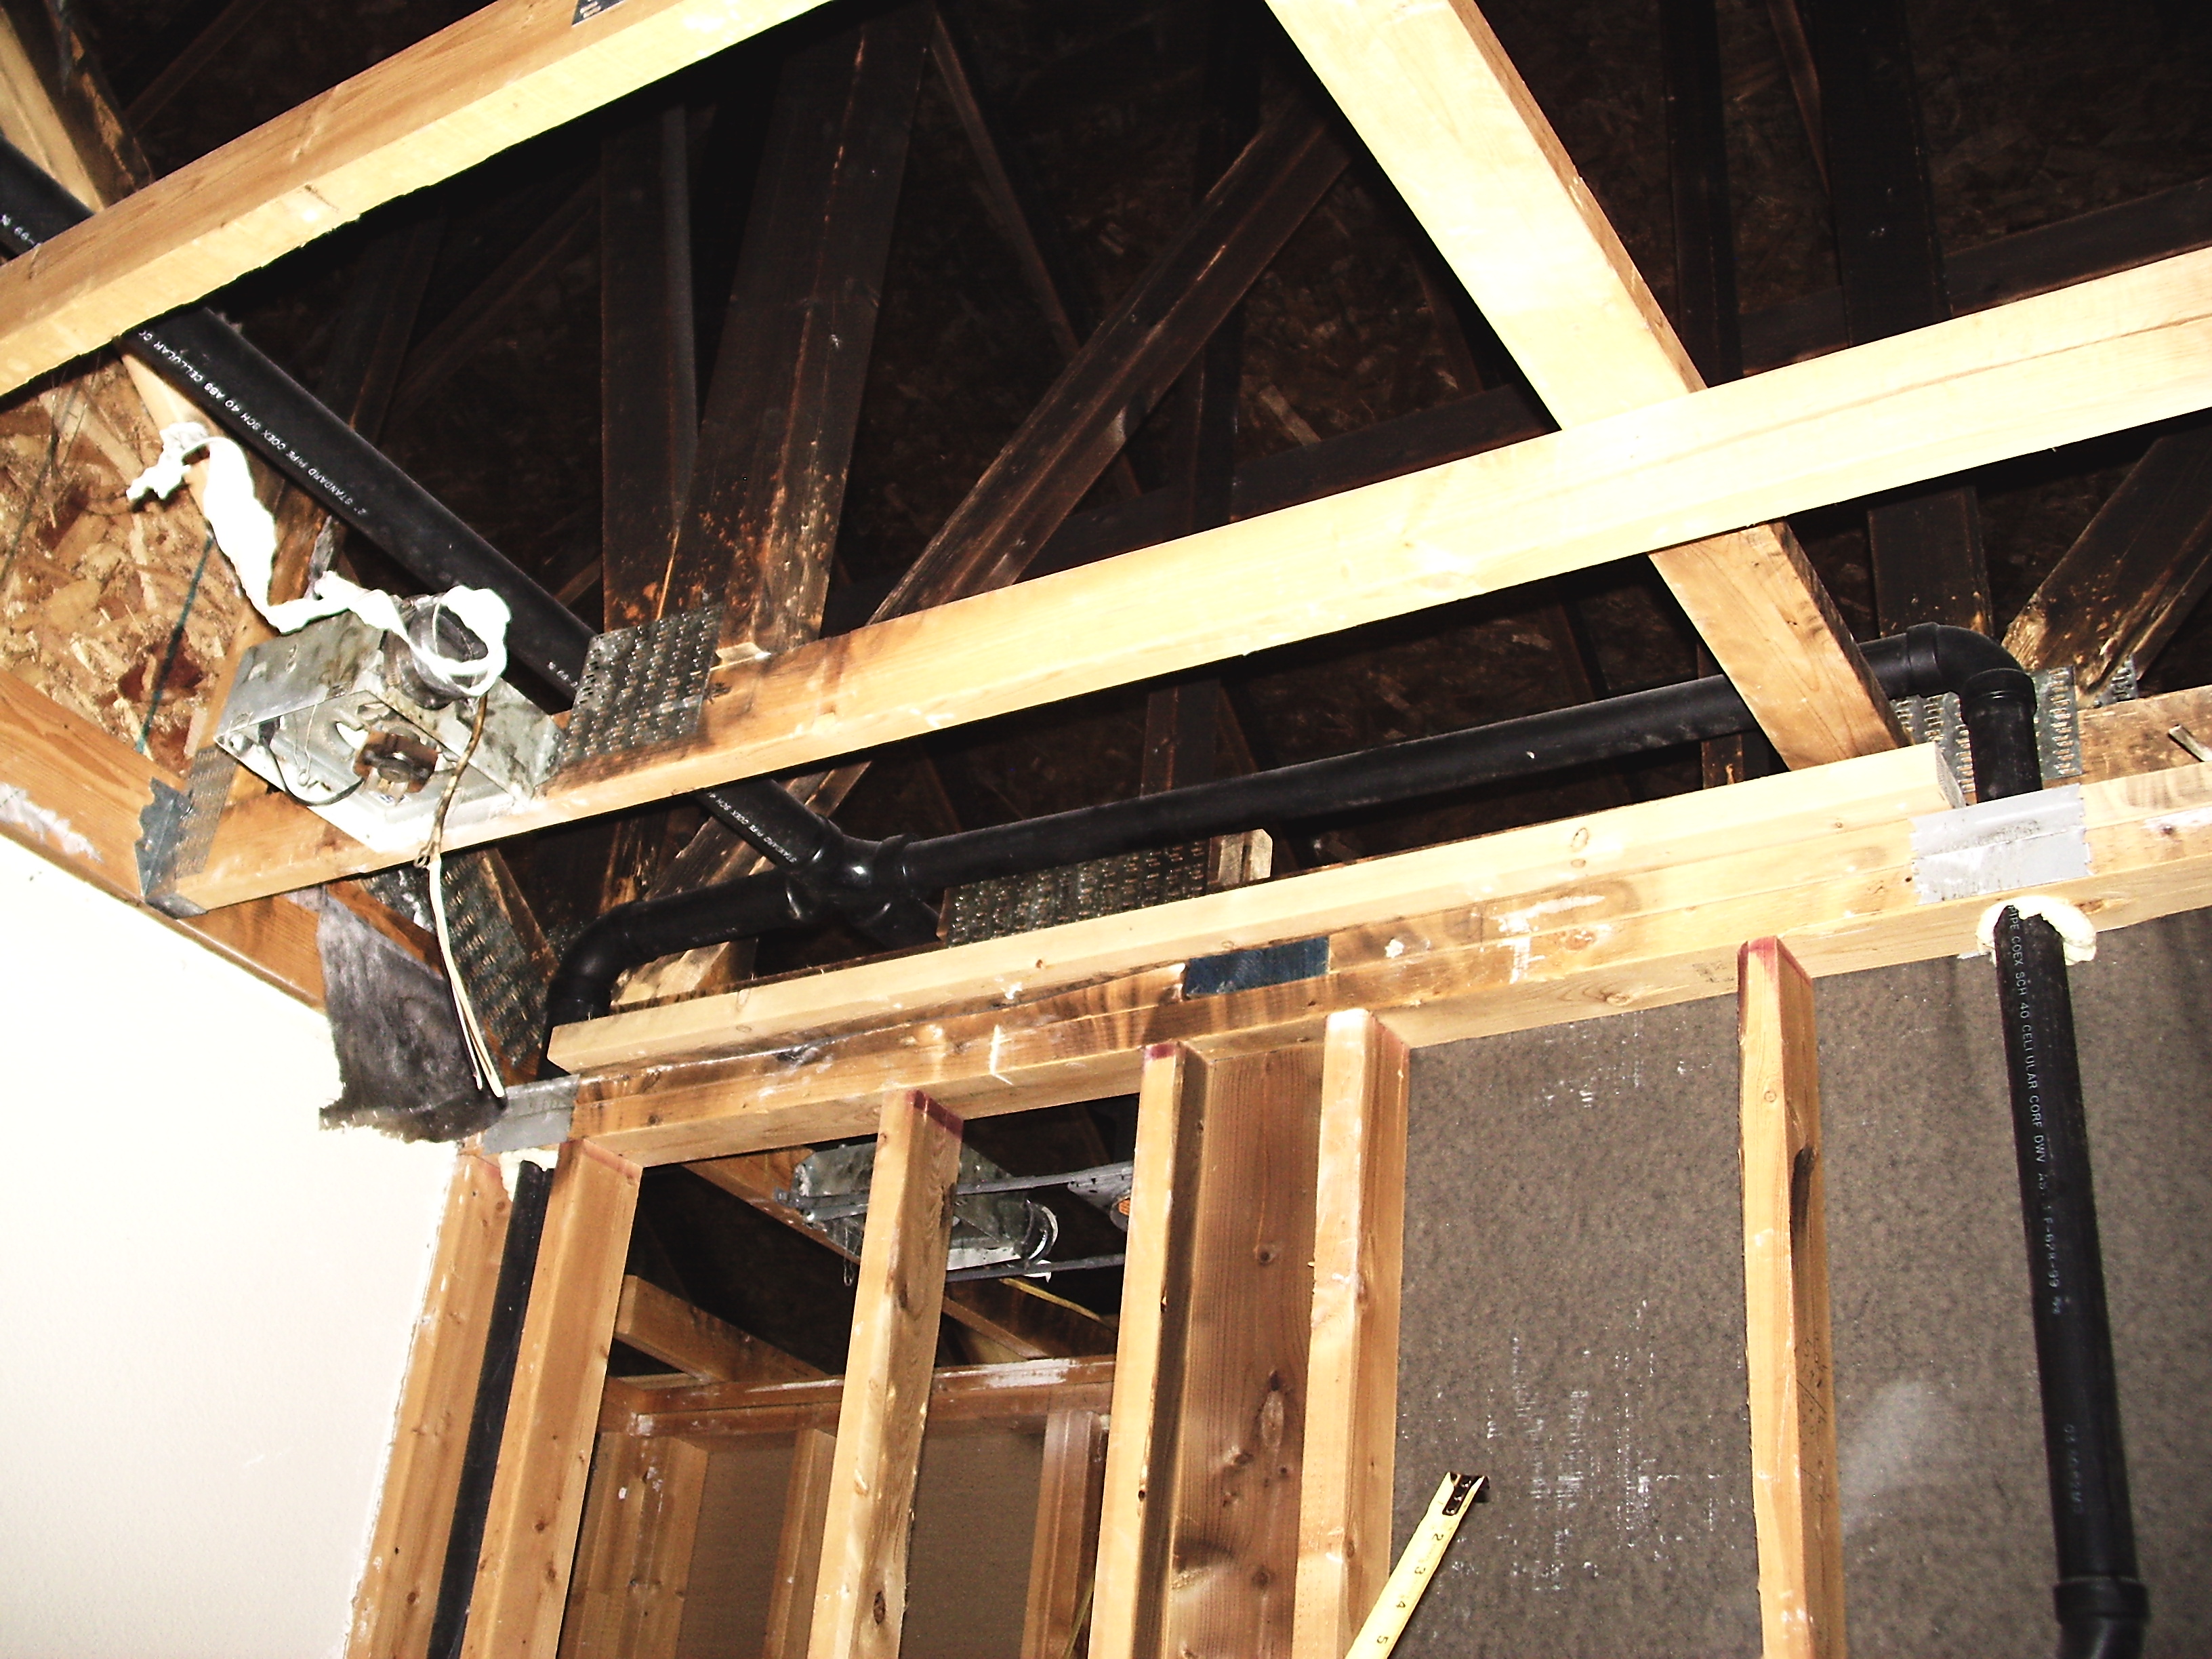 Fixing it up with Fire Restoration Services in Idaho Falls, ID